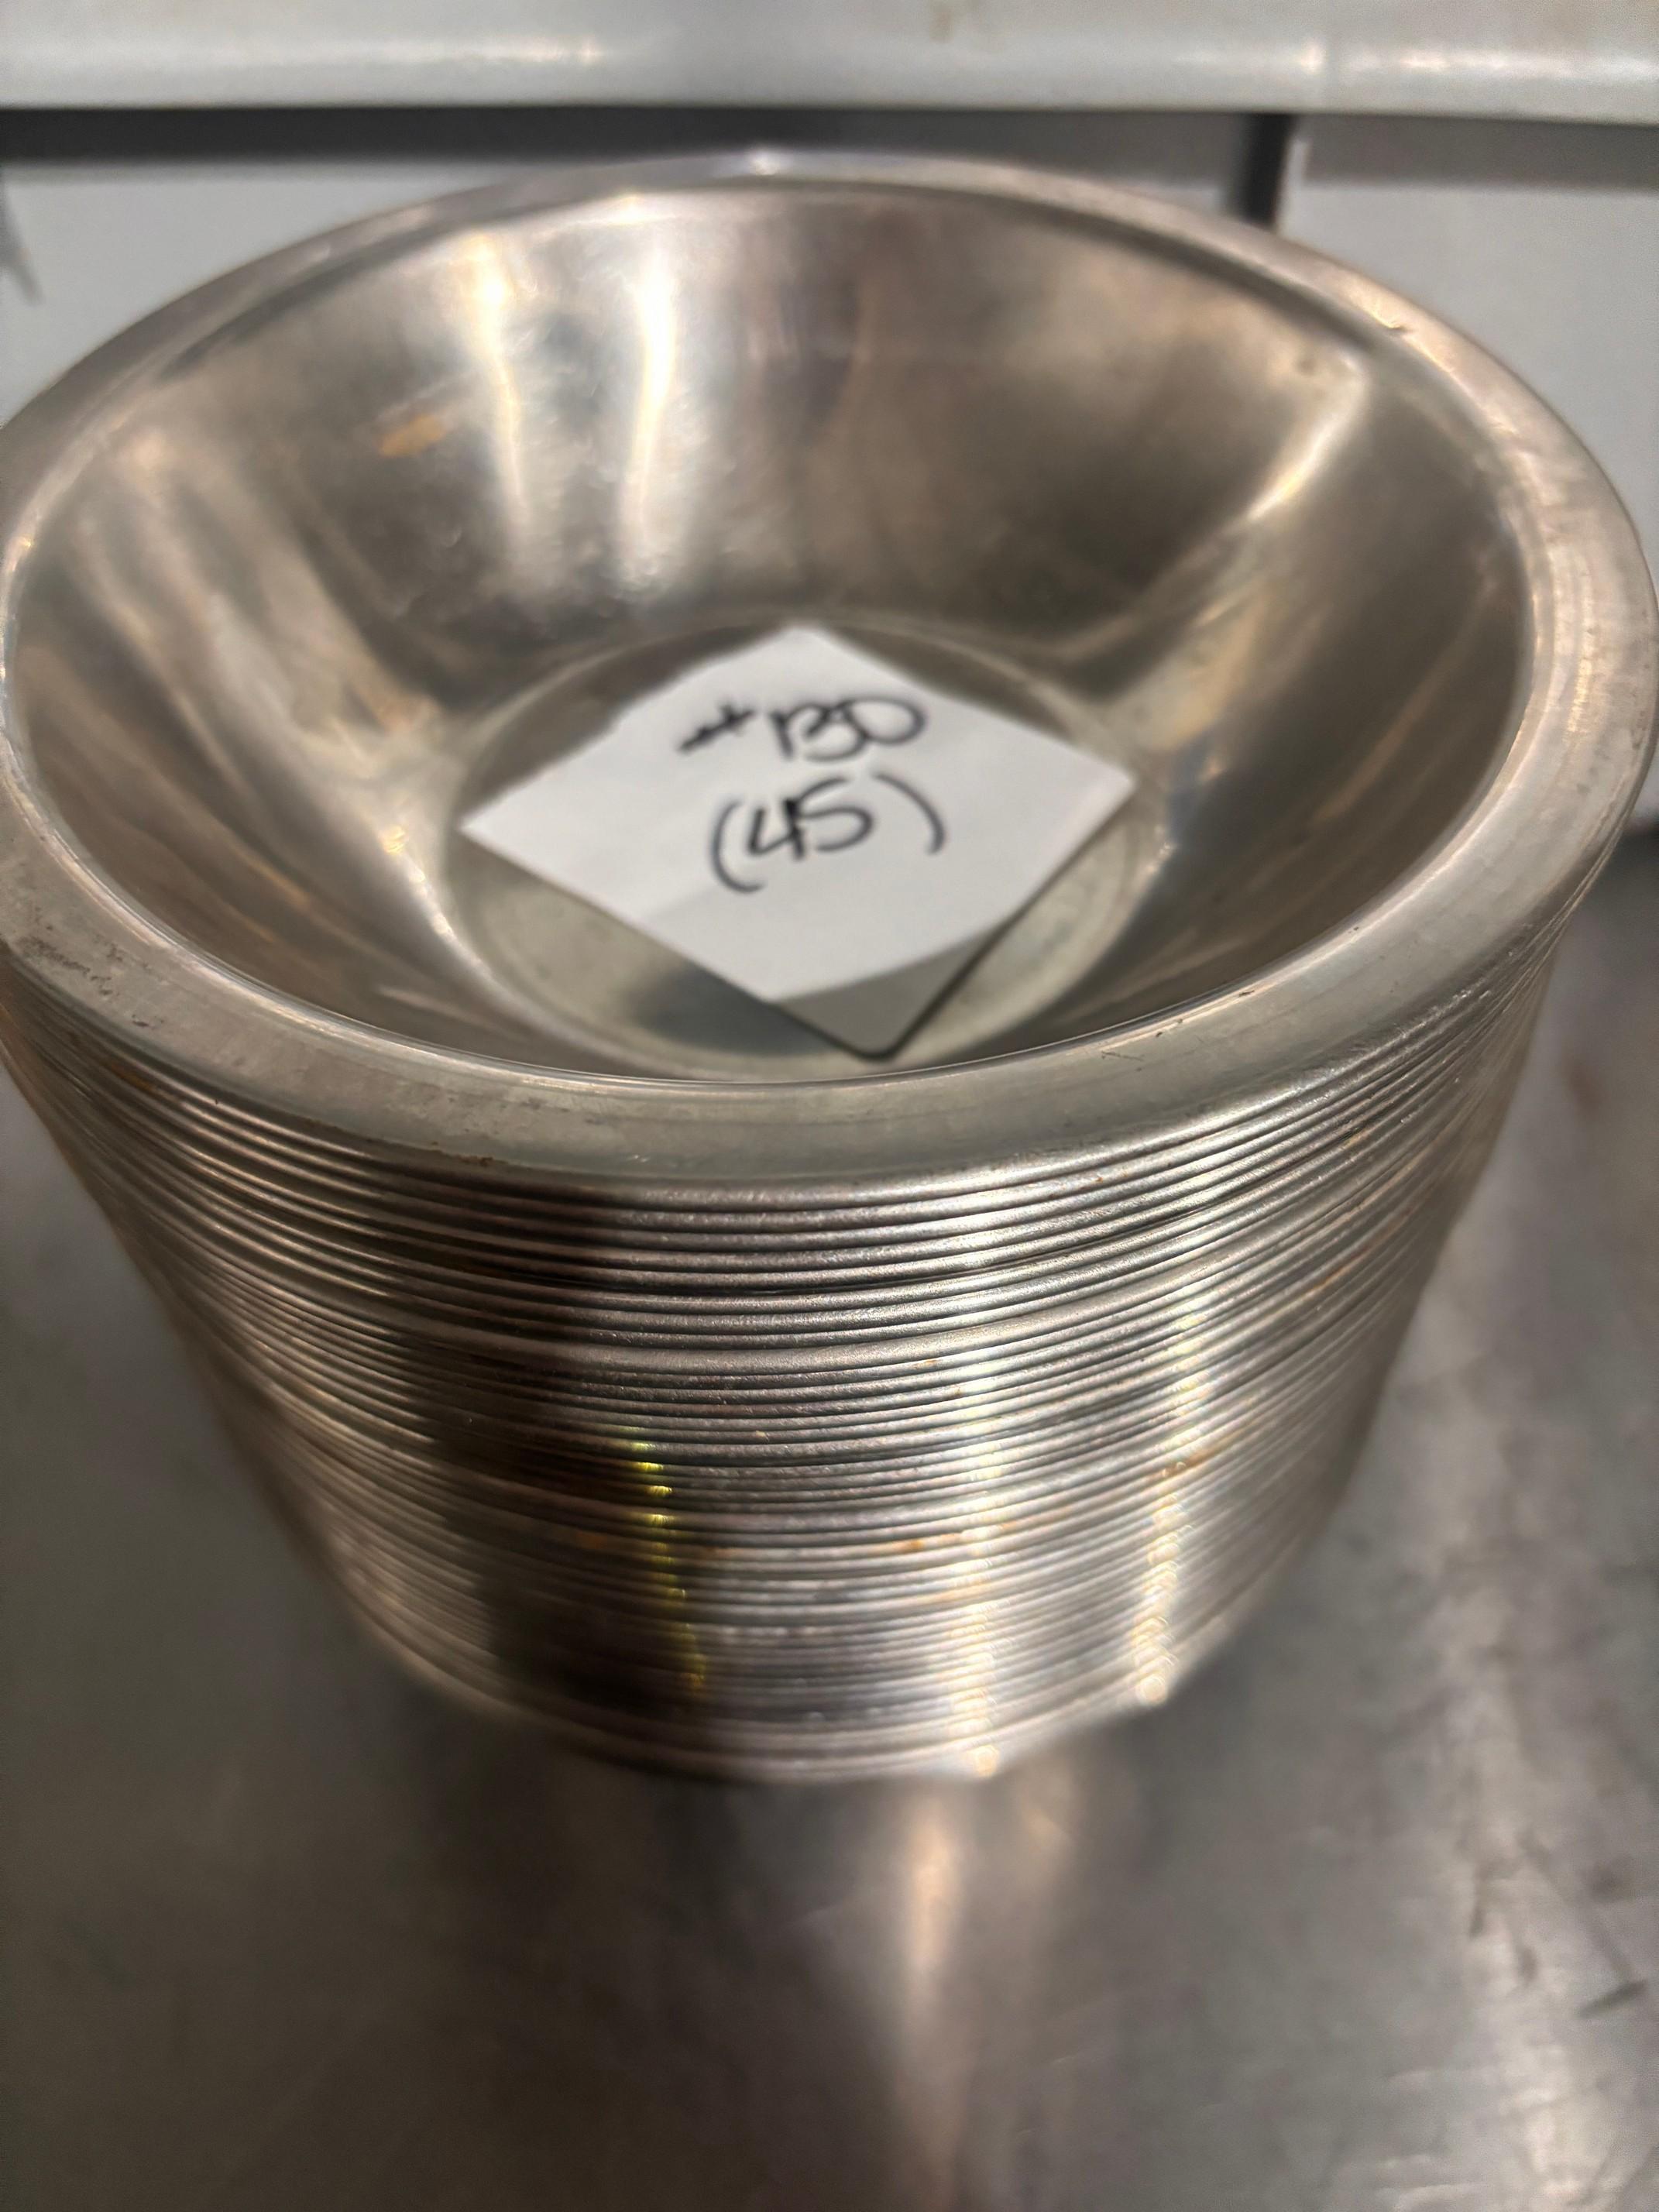 Stainless Steel Bowl 6" by 1.5" S/S Bowl